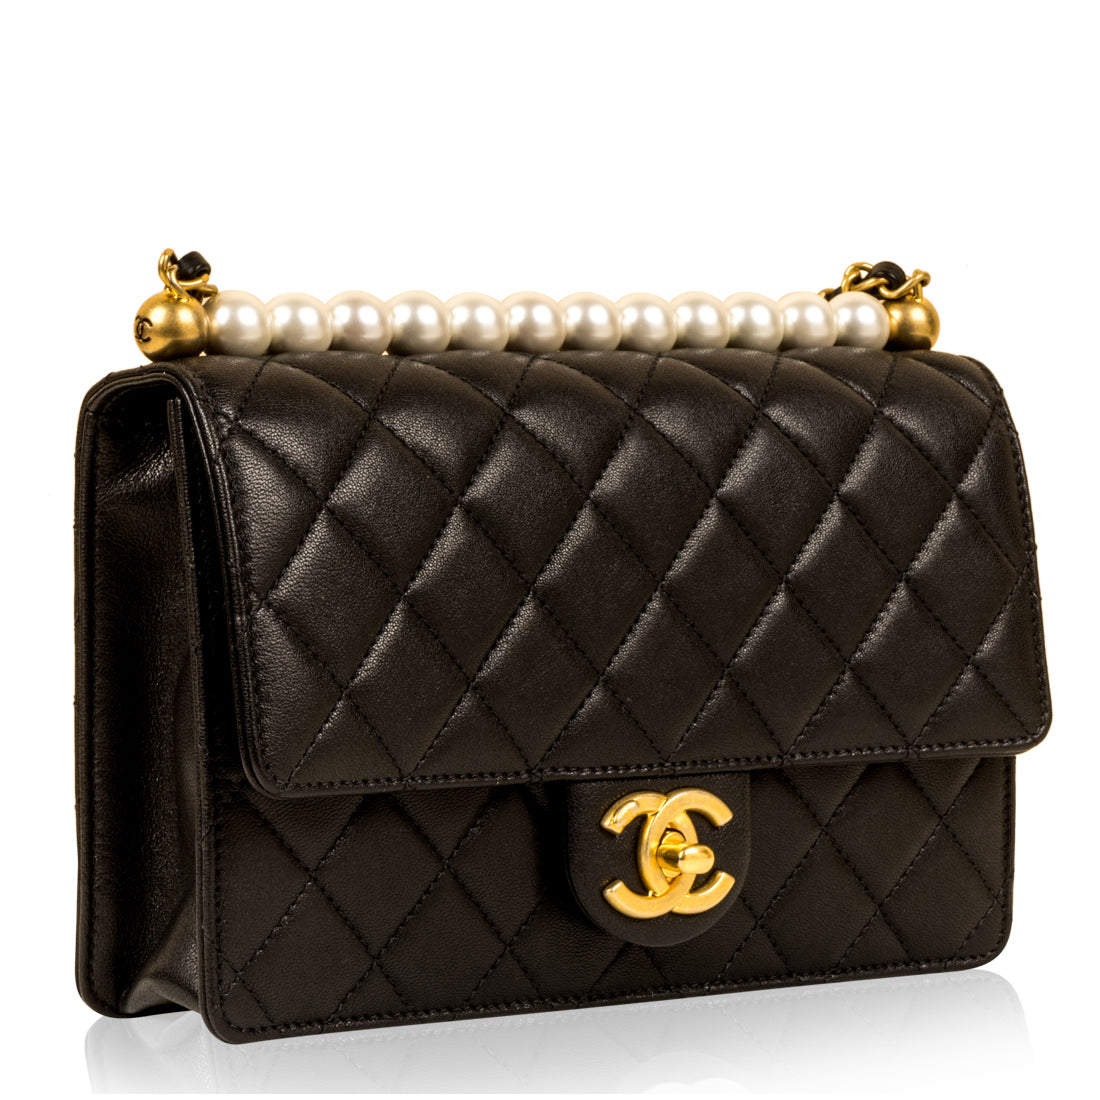 CHANEL, Bags, Chanel Limited Edition Peace 7 Mini Bag